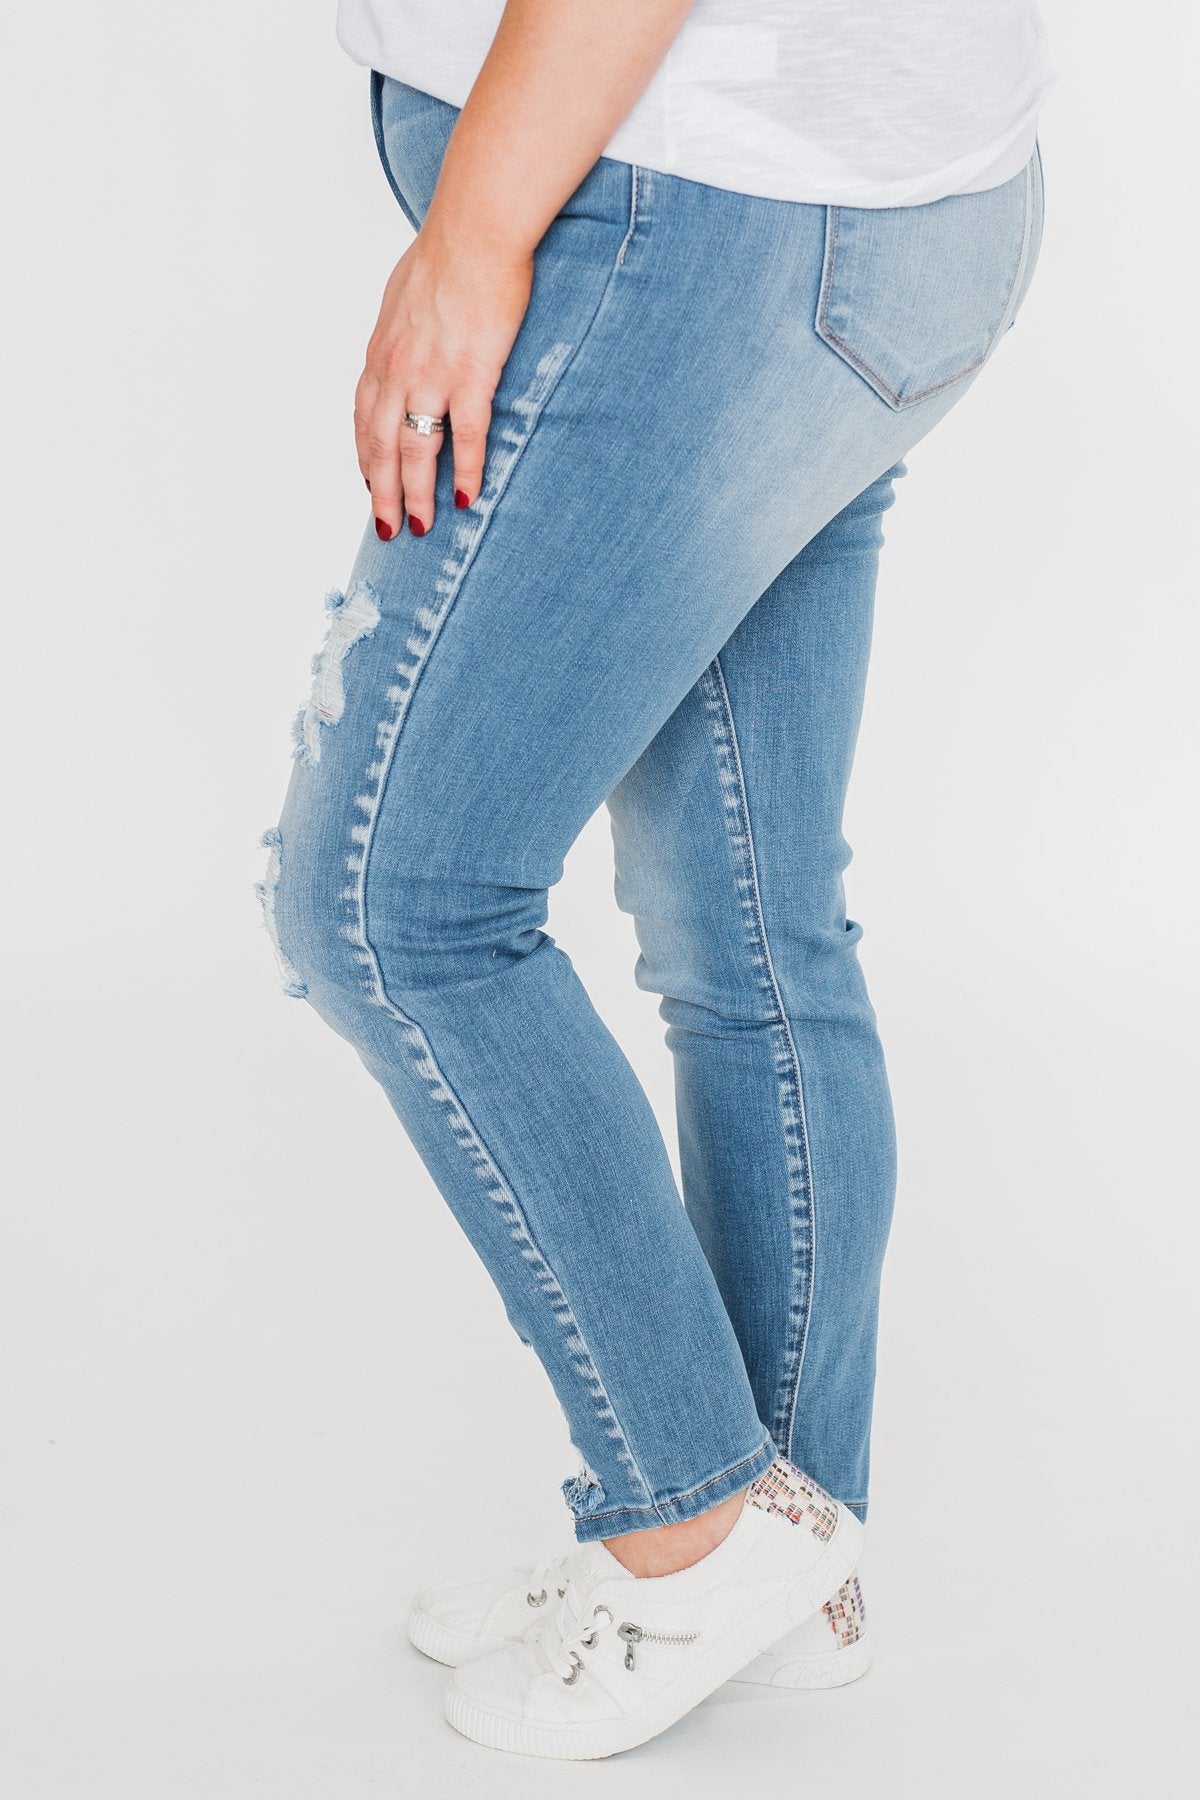 KanCan Distressed Skinny Jeans- Tiffany Wash – The Pulse Boutique